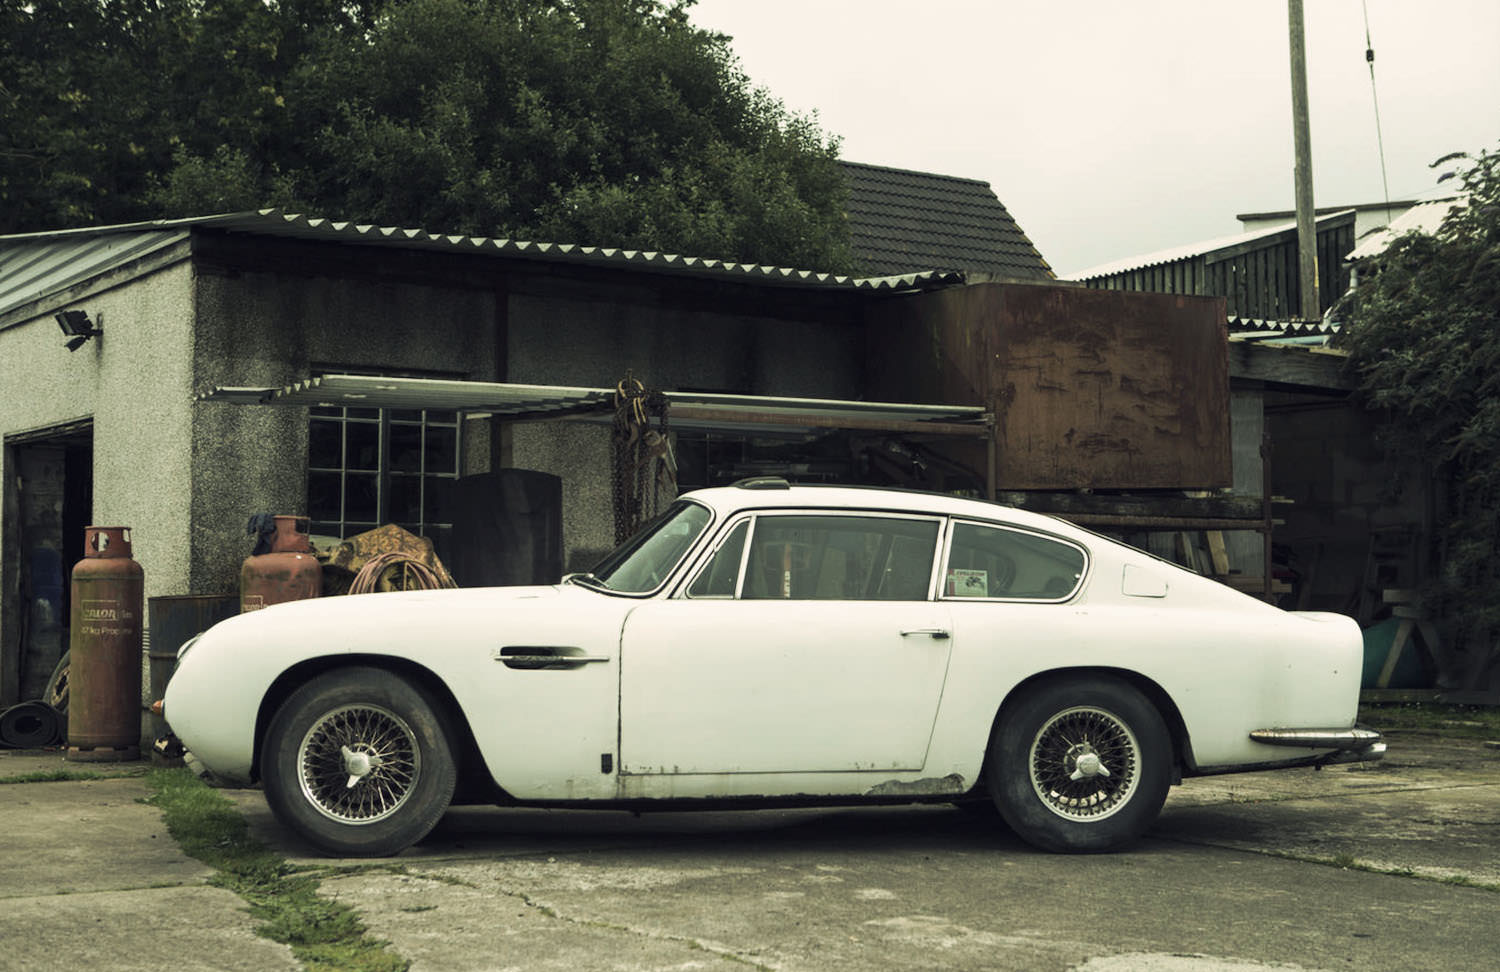 Aston Martin DB6 Backgrounds on Wallpapers Vista